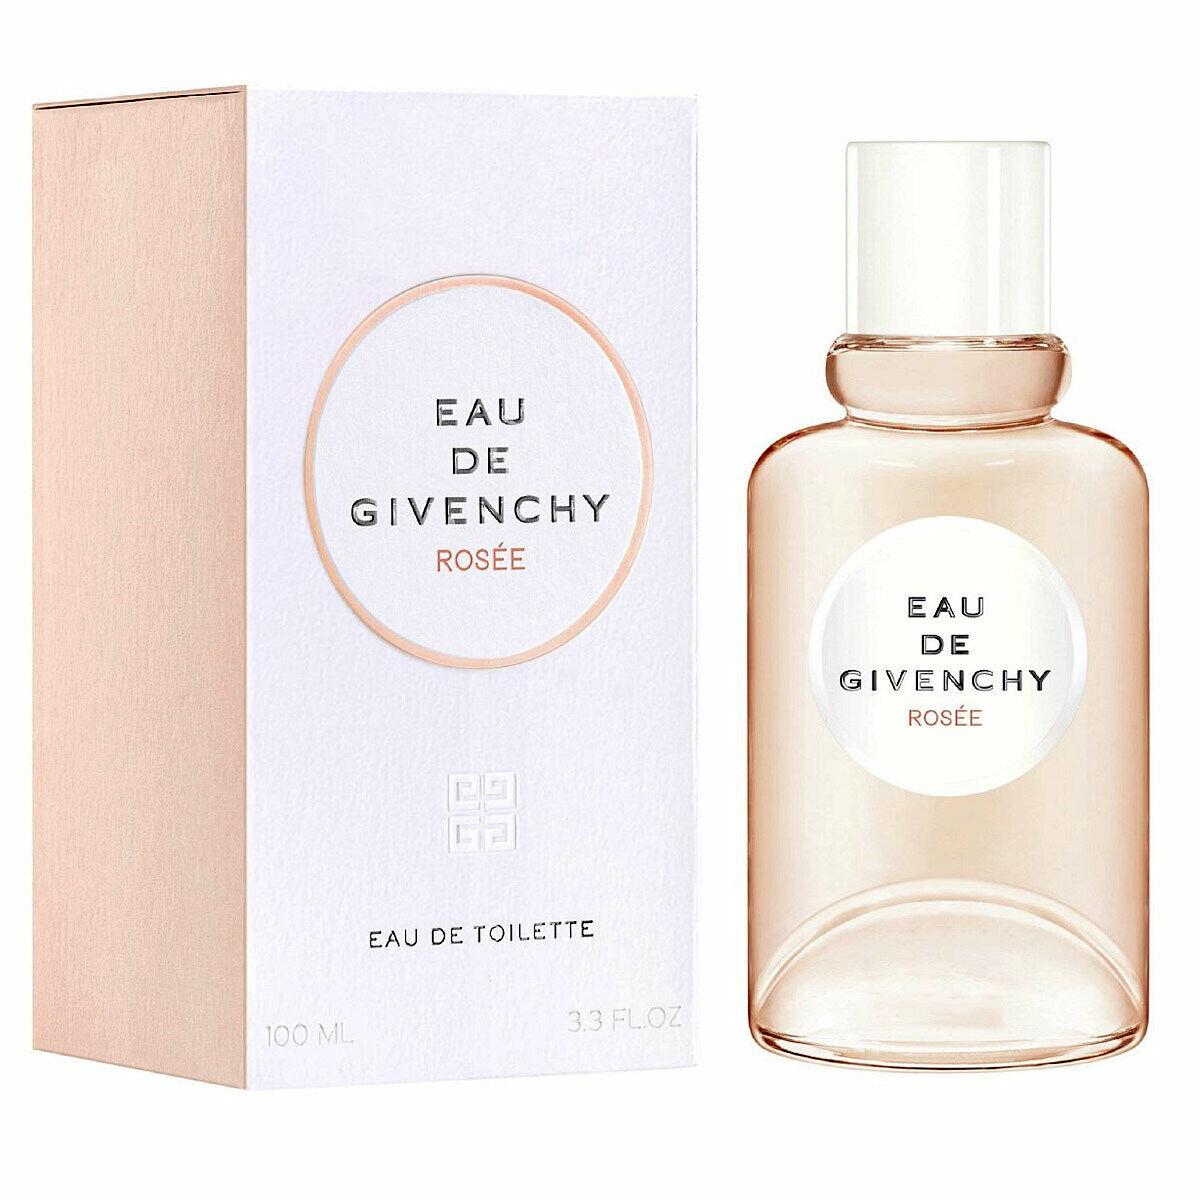 Eau de Givenchy Rosee by Givenchy 3.3 Fl oz Edt Spray For Women